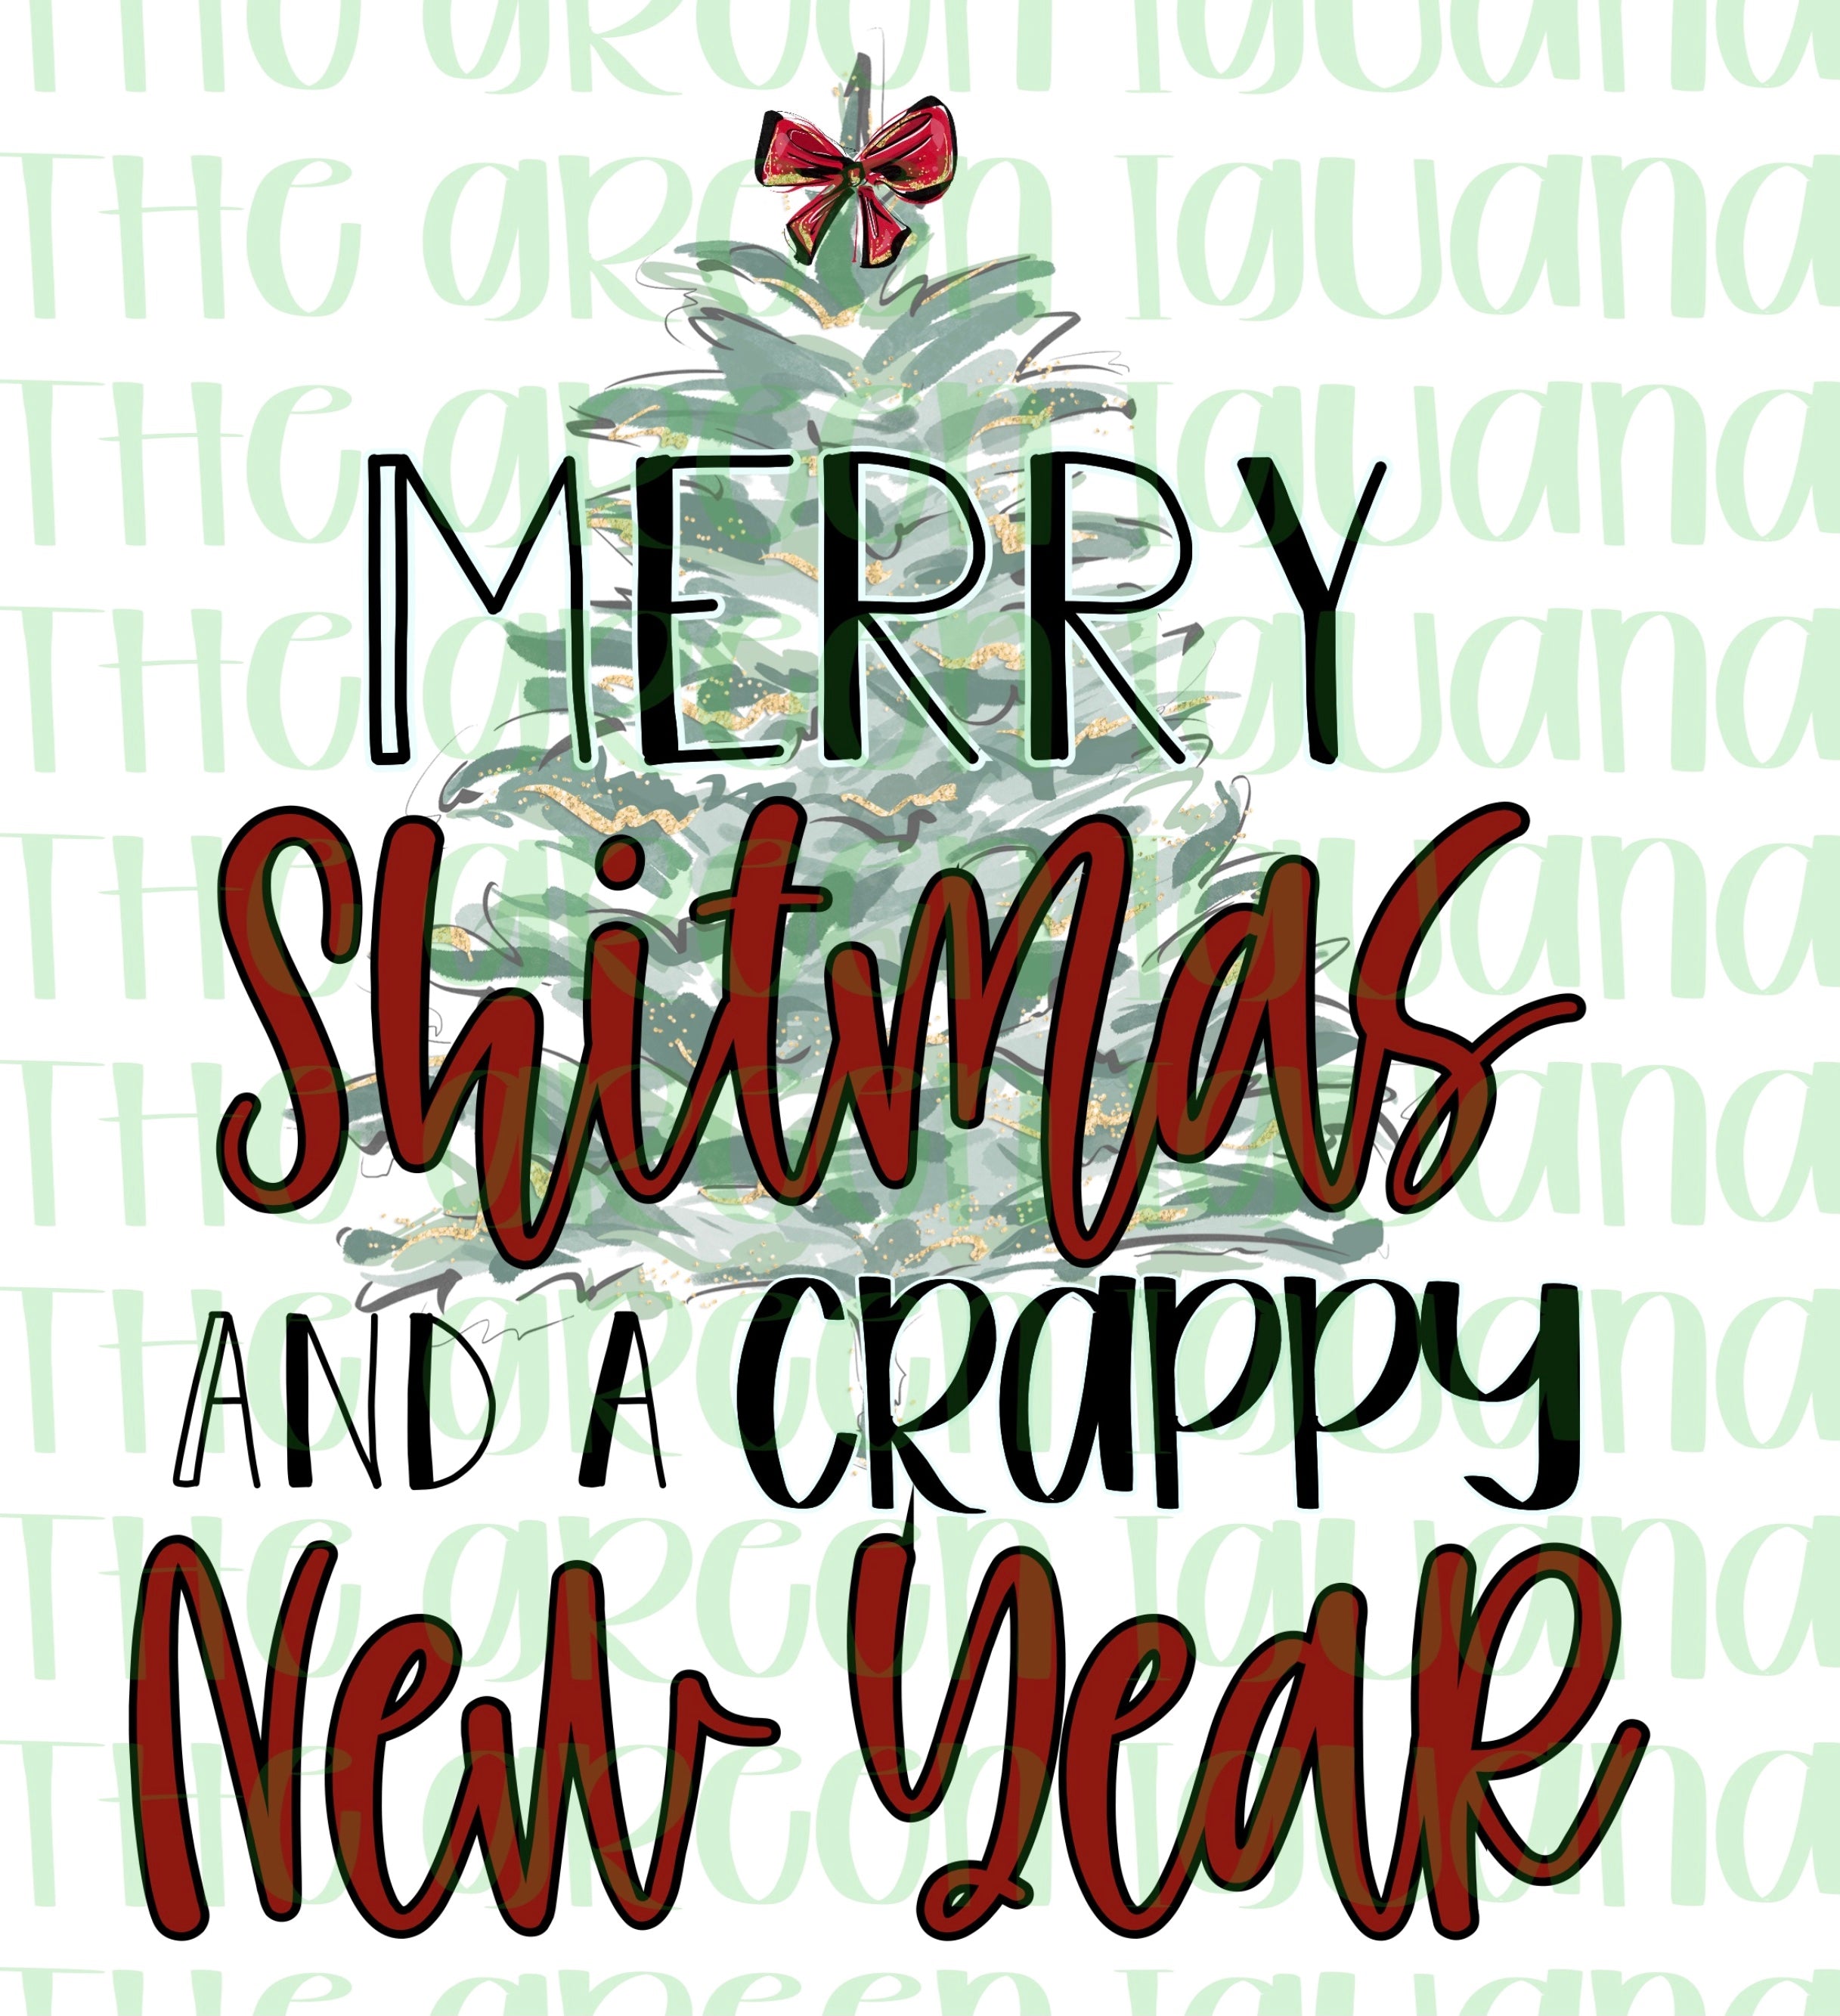 Merry shitmas and a crappy new year - DIGITAL